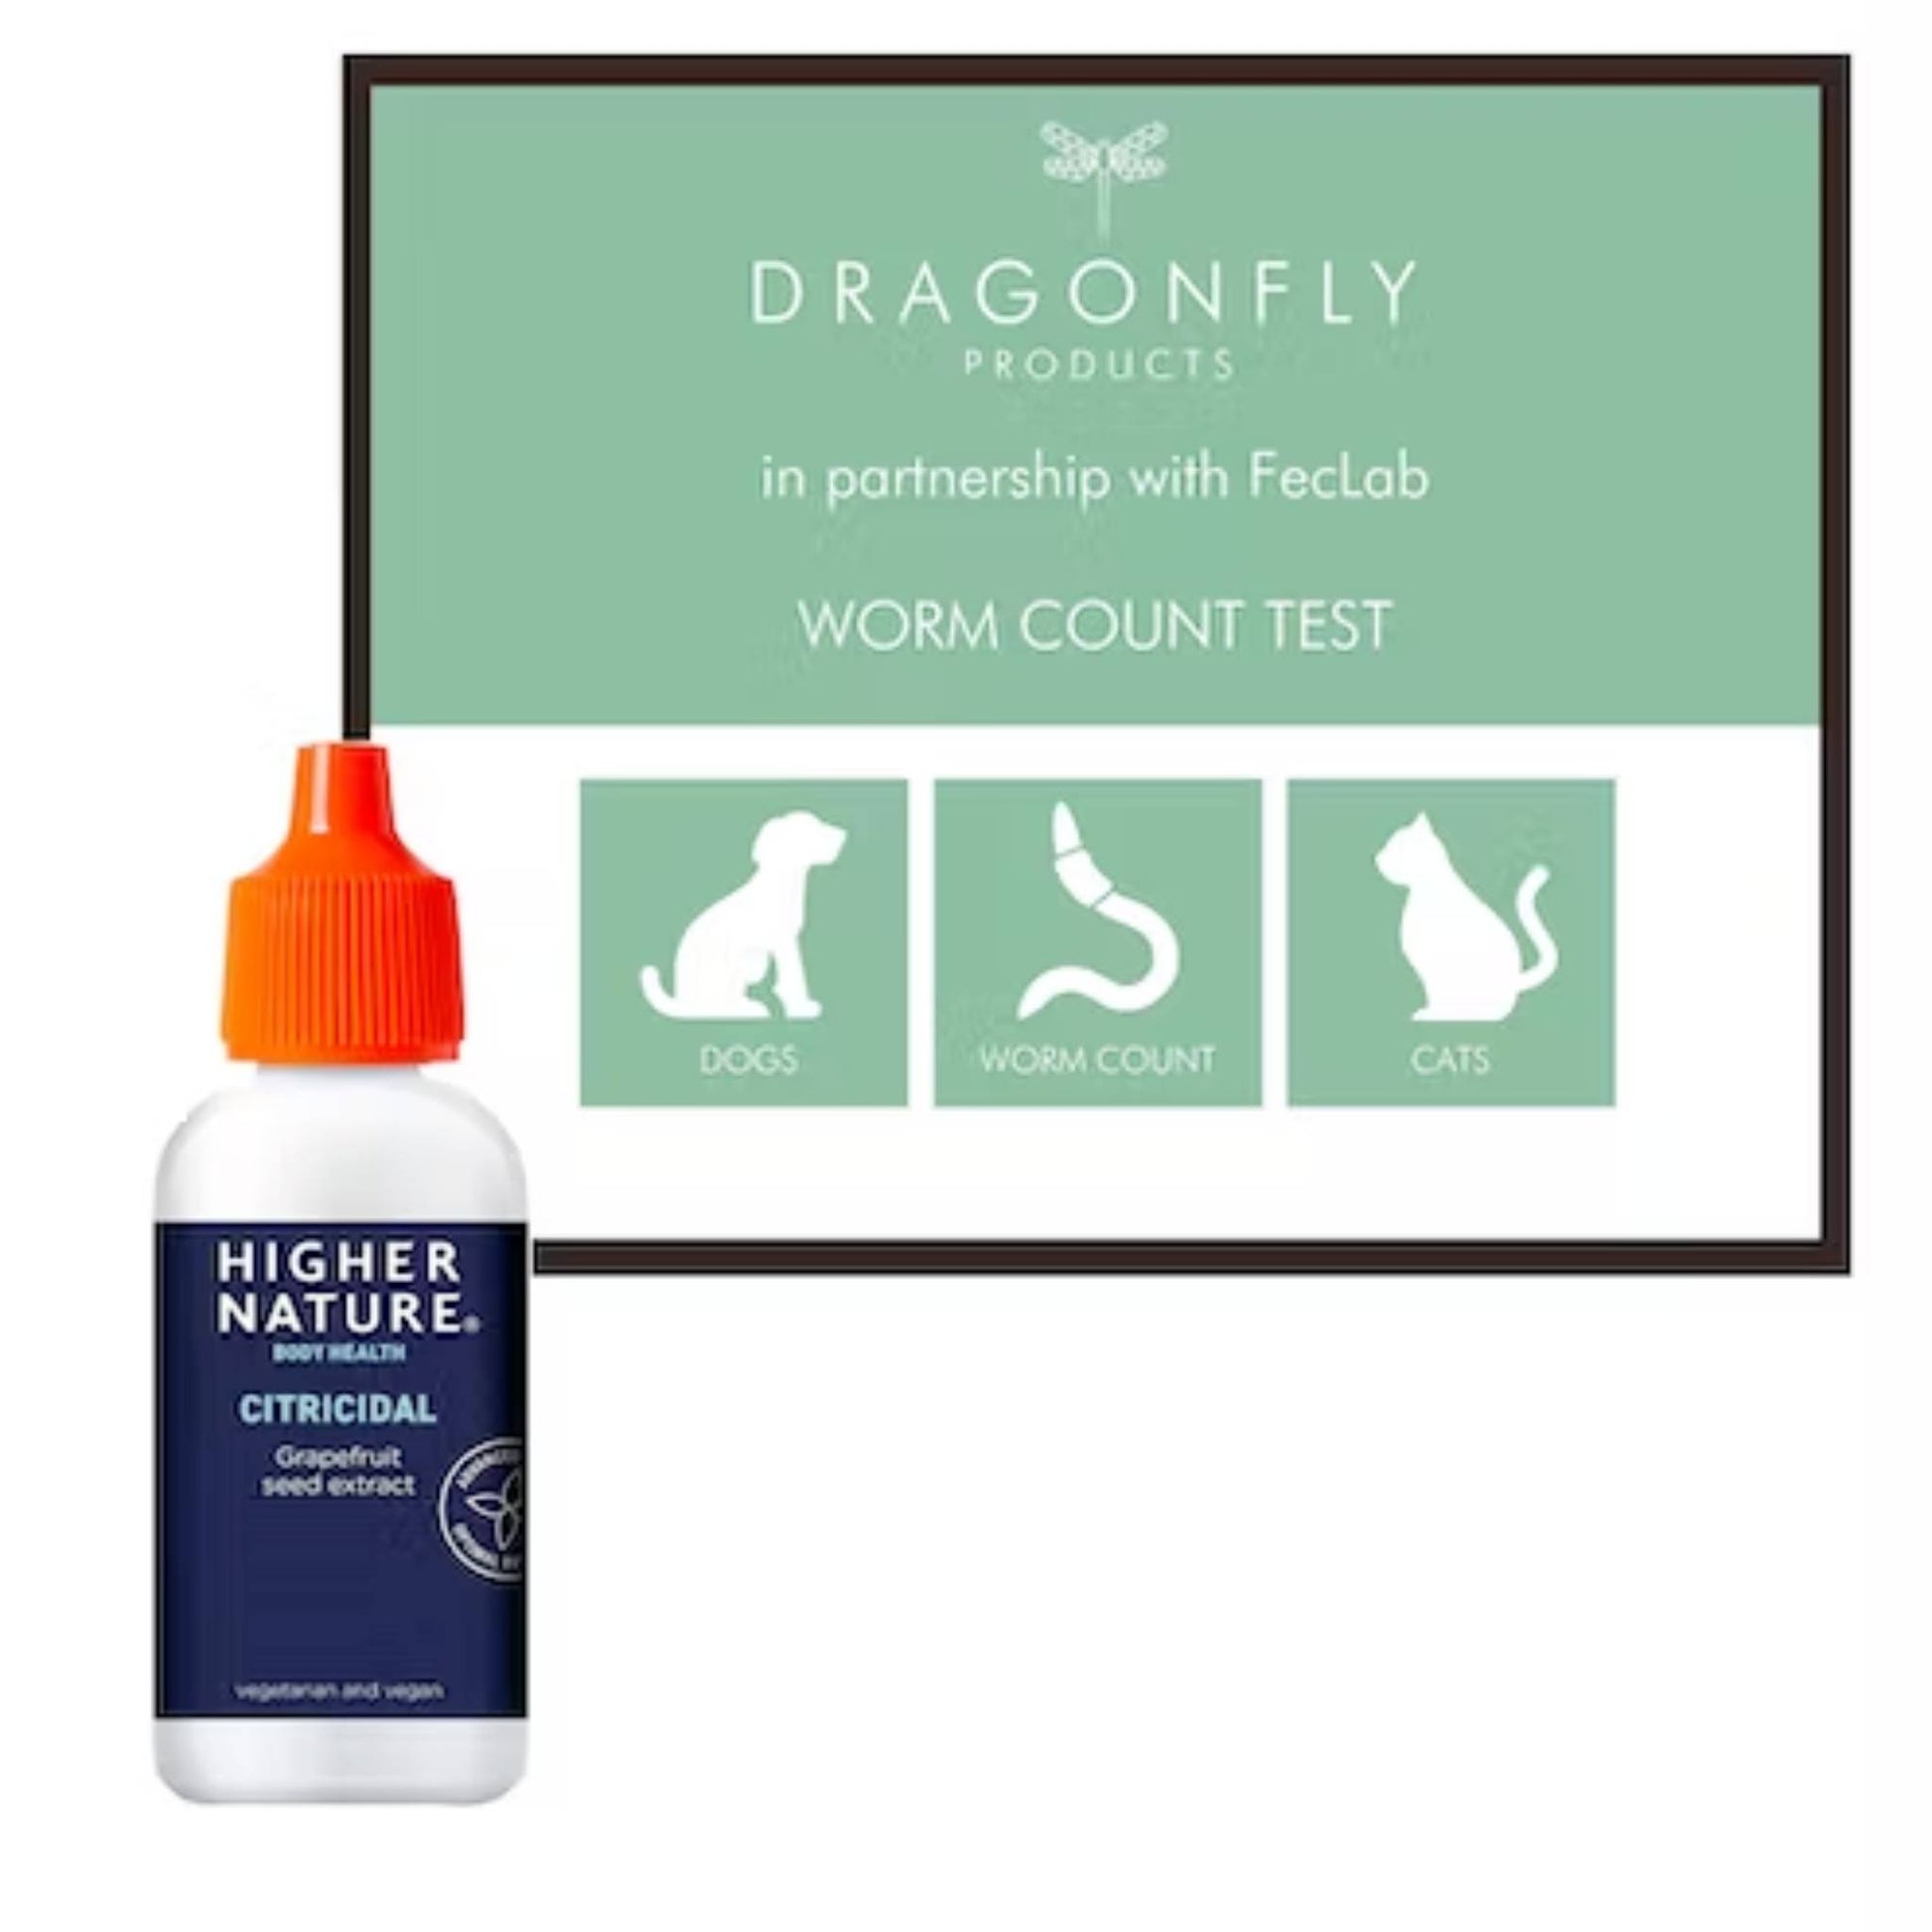 Wormcount retest kit for dogs